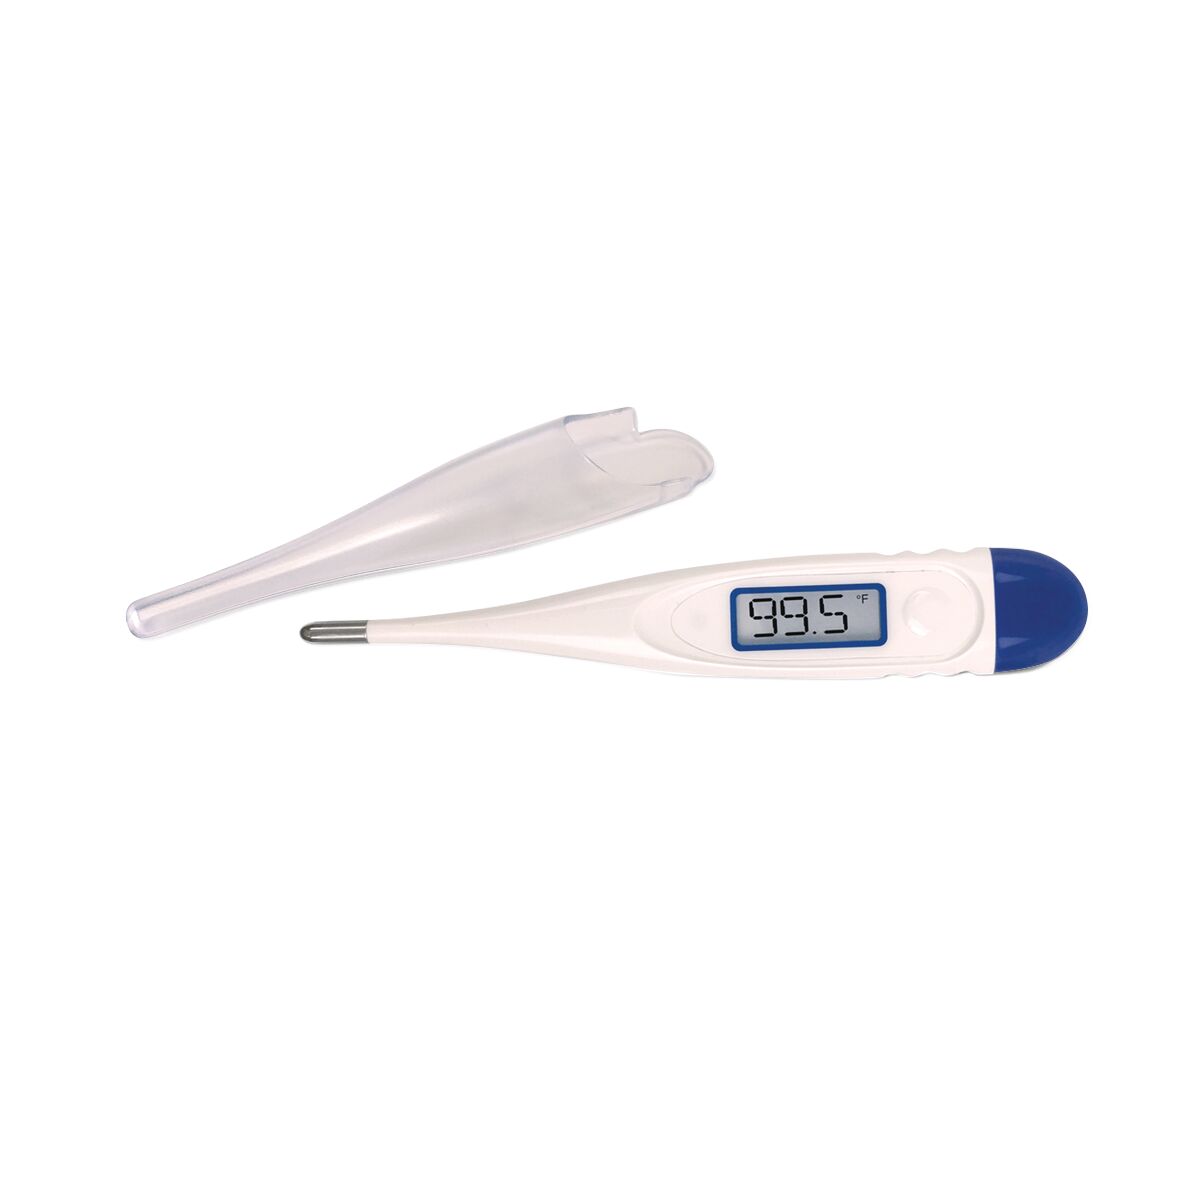 ADC Hypothermia Digital Extended Range Stick Thermometer, Adtemp 419 -  1023694 - ADC - 419 - Clinical Thermometer - 3B Scientific